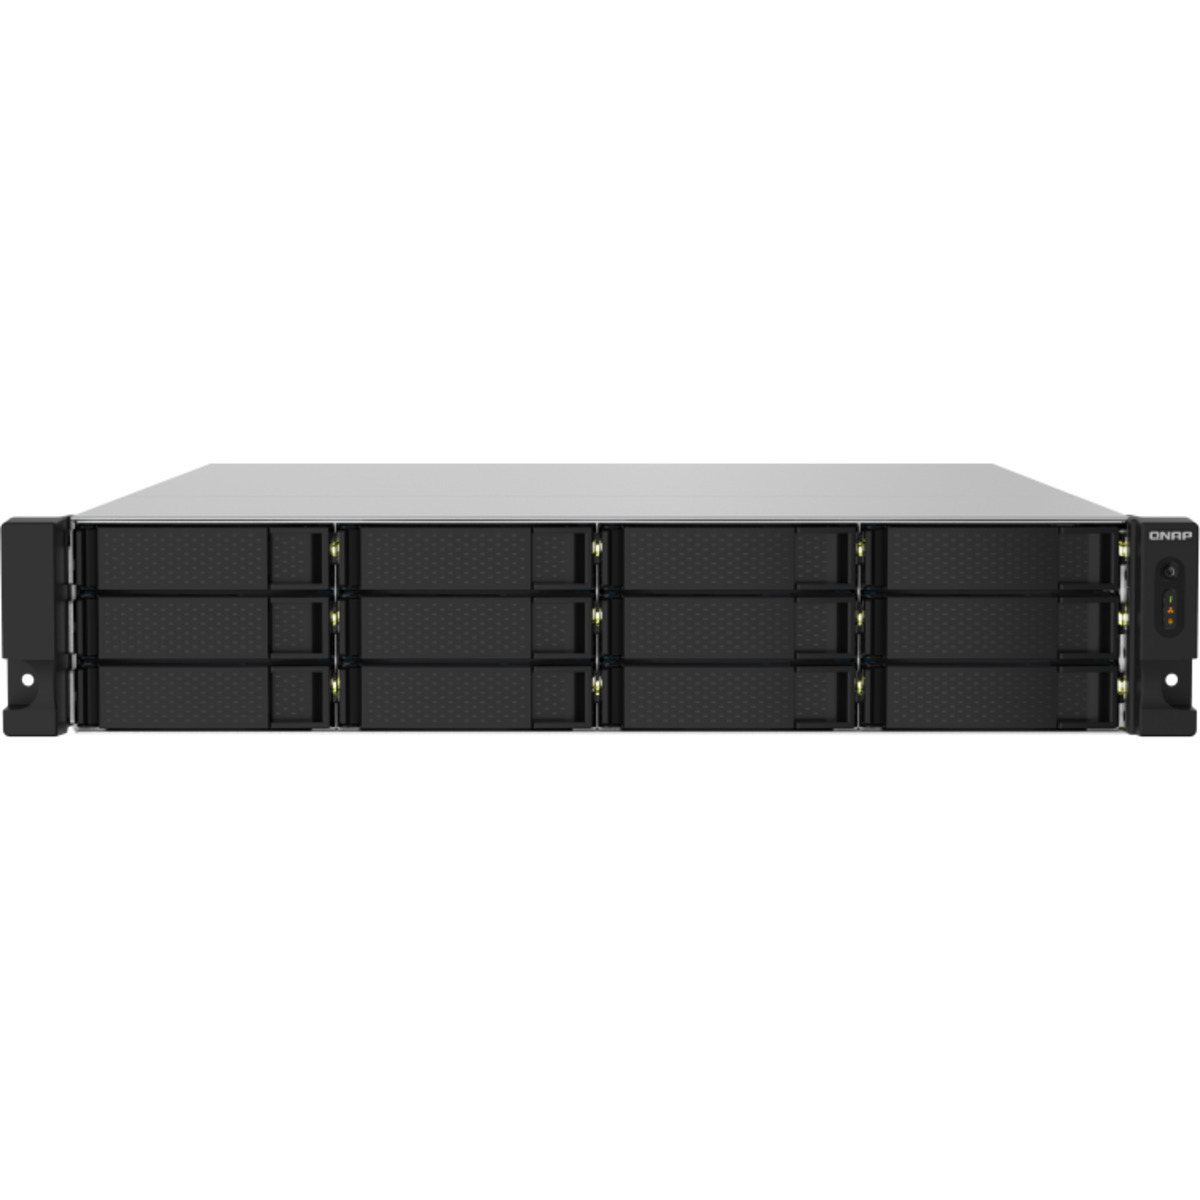 buy $7568 QNAP TS-1232PXU-RP 240tb RackMount NAS - Network Attached Storage Device 12x20000gb Western Digital Red Pro WD201KFGX 3.5 7200rpm SATA 6Gb/s HDD NAS Class Drives Installed - Burn-In Tested - FREE RAM UPGRADE - nas headquarters buy network attached storage server device das new raid-5 free shipping simply usa TS-1232PXU-RP